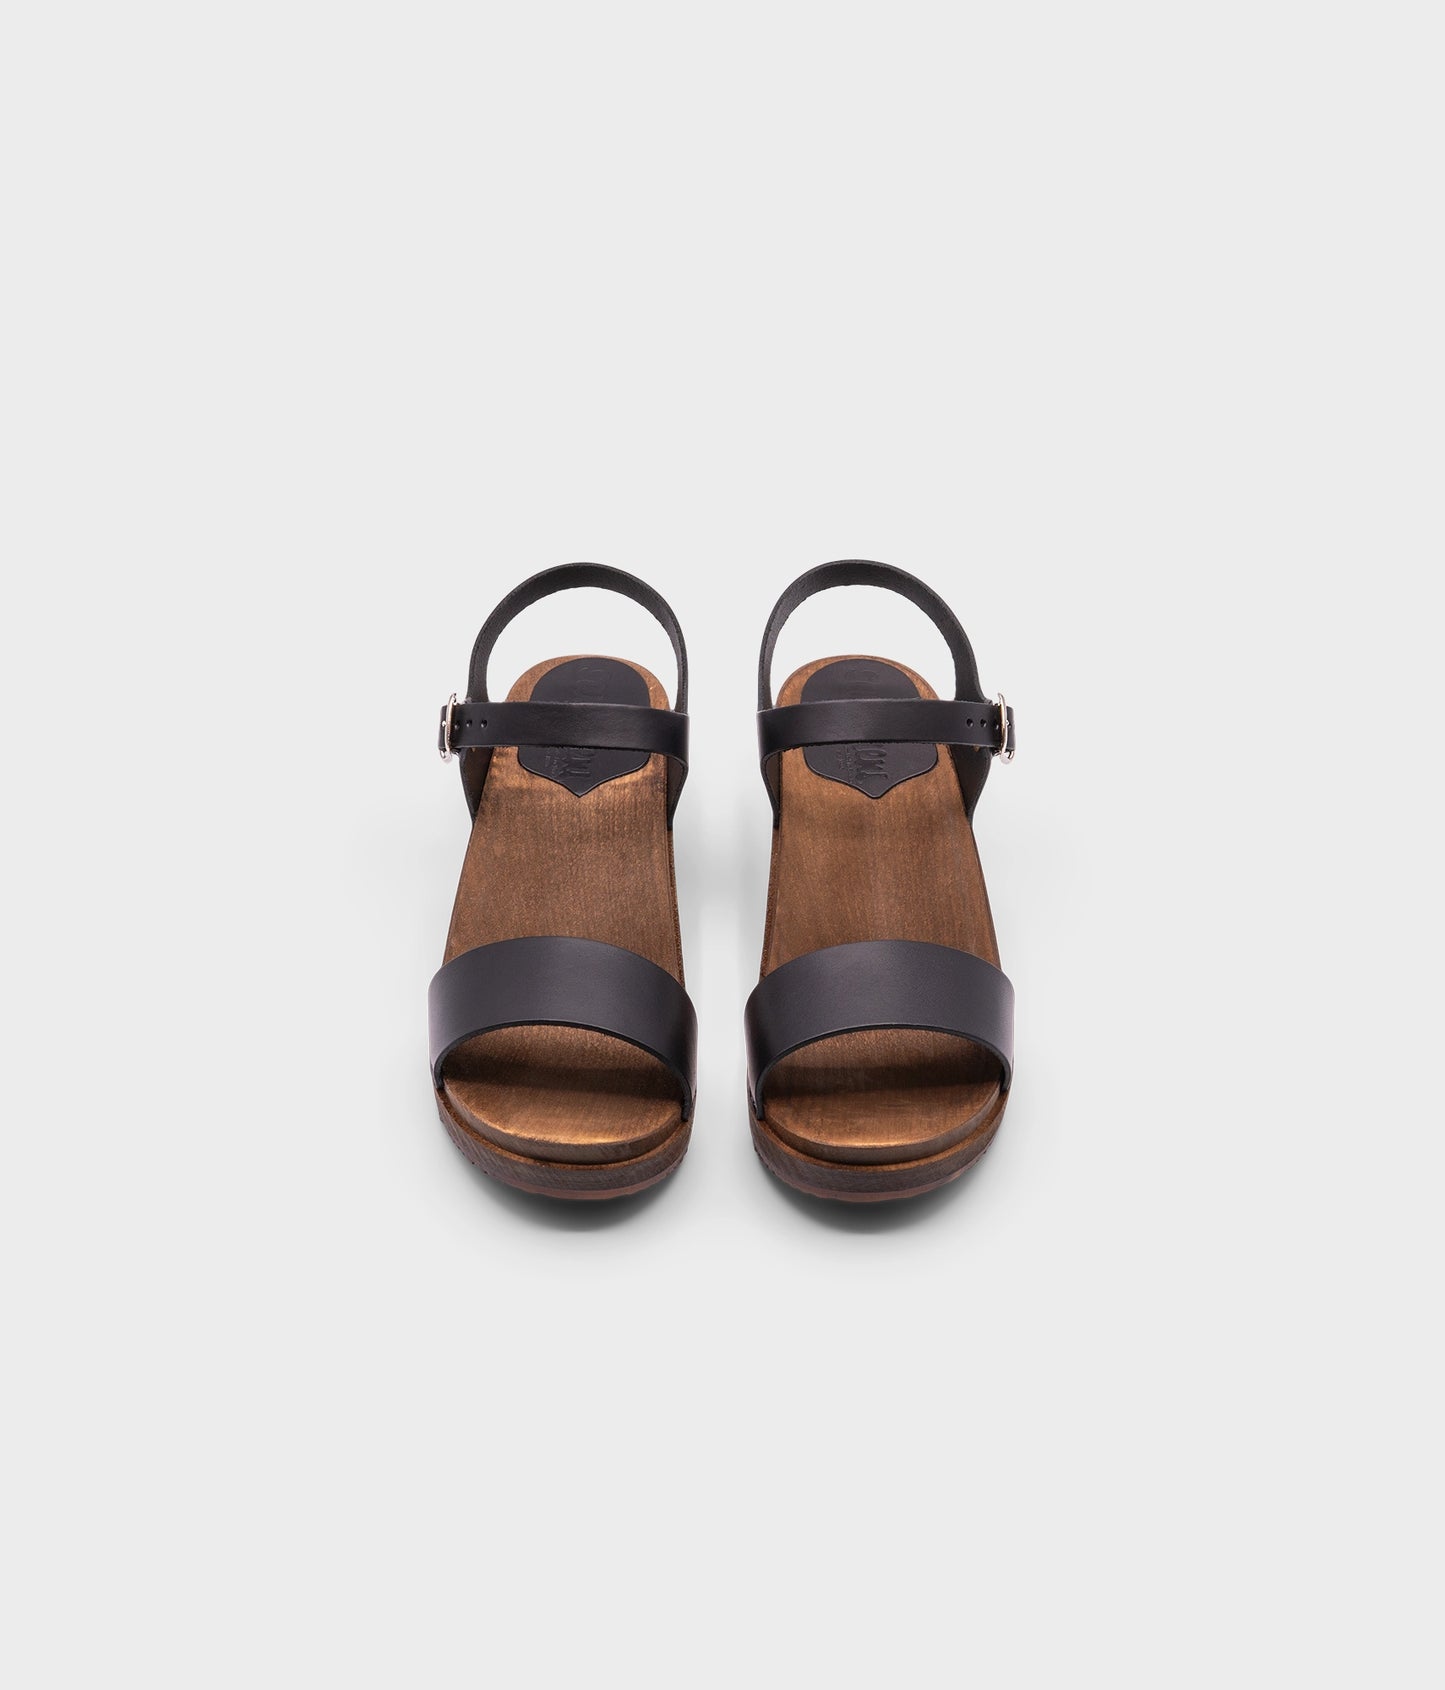 low heeled open-toe clog sandal in black vegetable tanned leather stapled on a dark wooden base